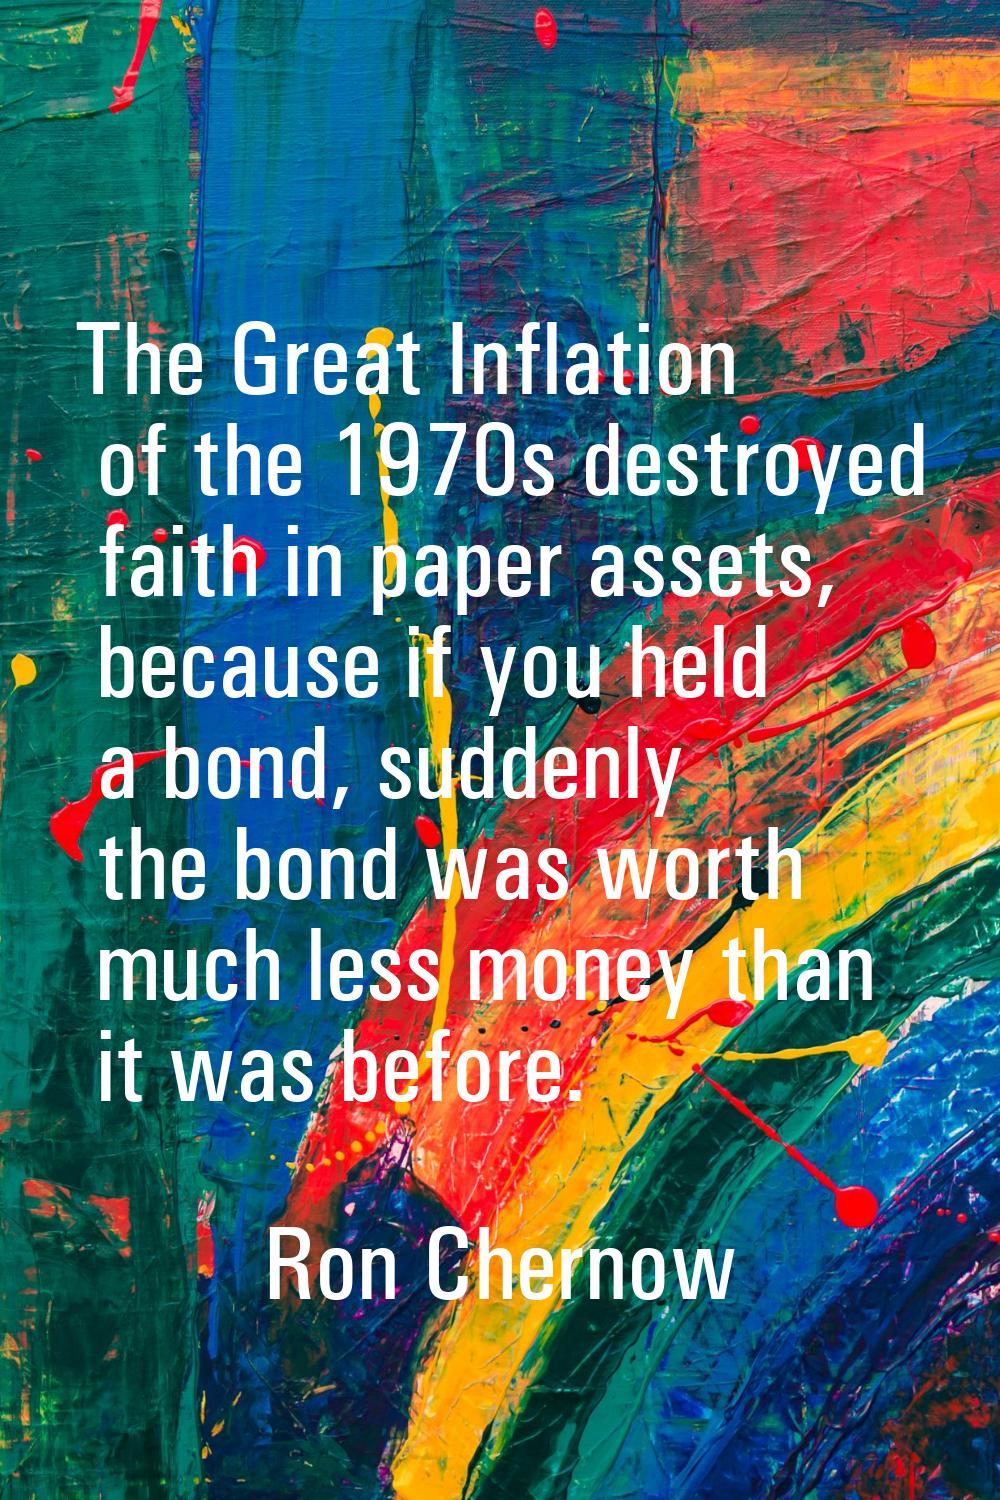 The Great Inflation of the 1970s destroyed faith in paper assets, because if you held a bond, sudde